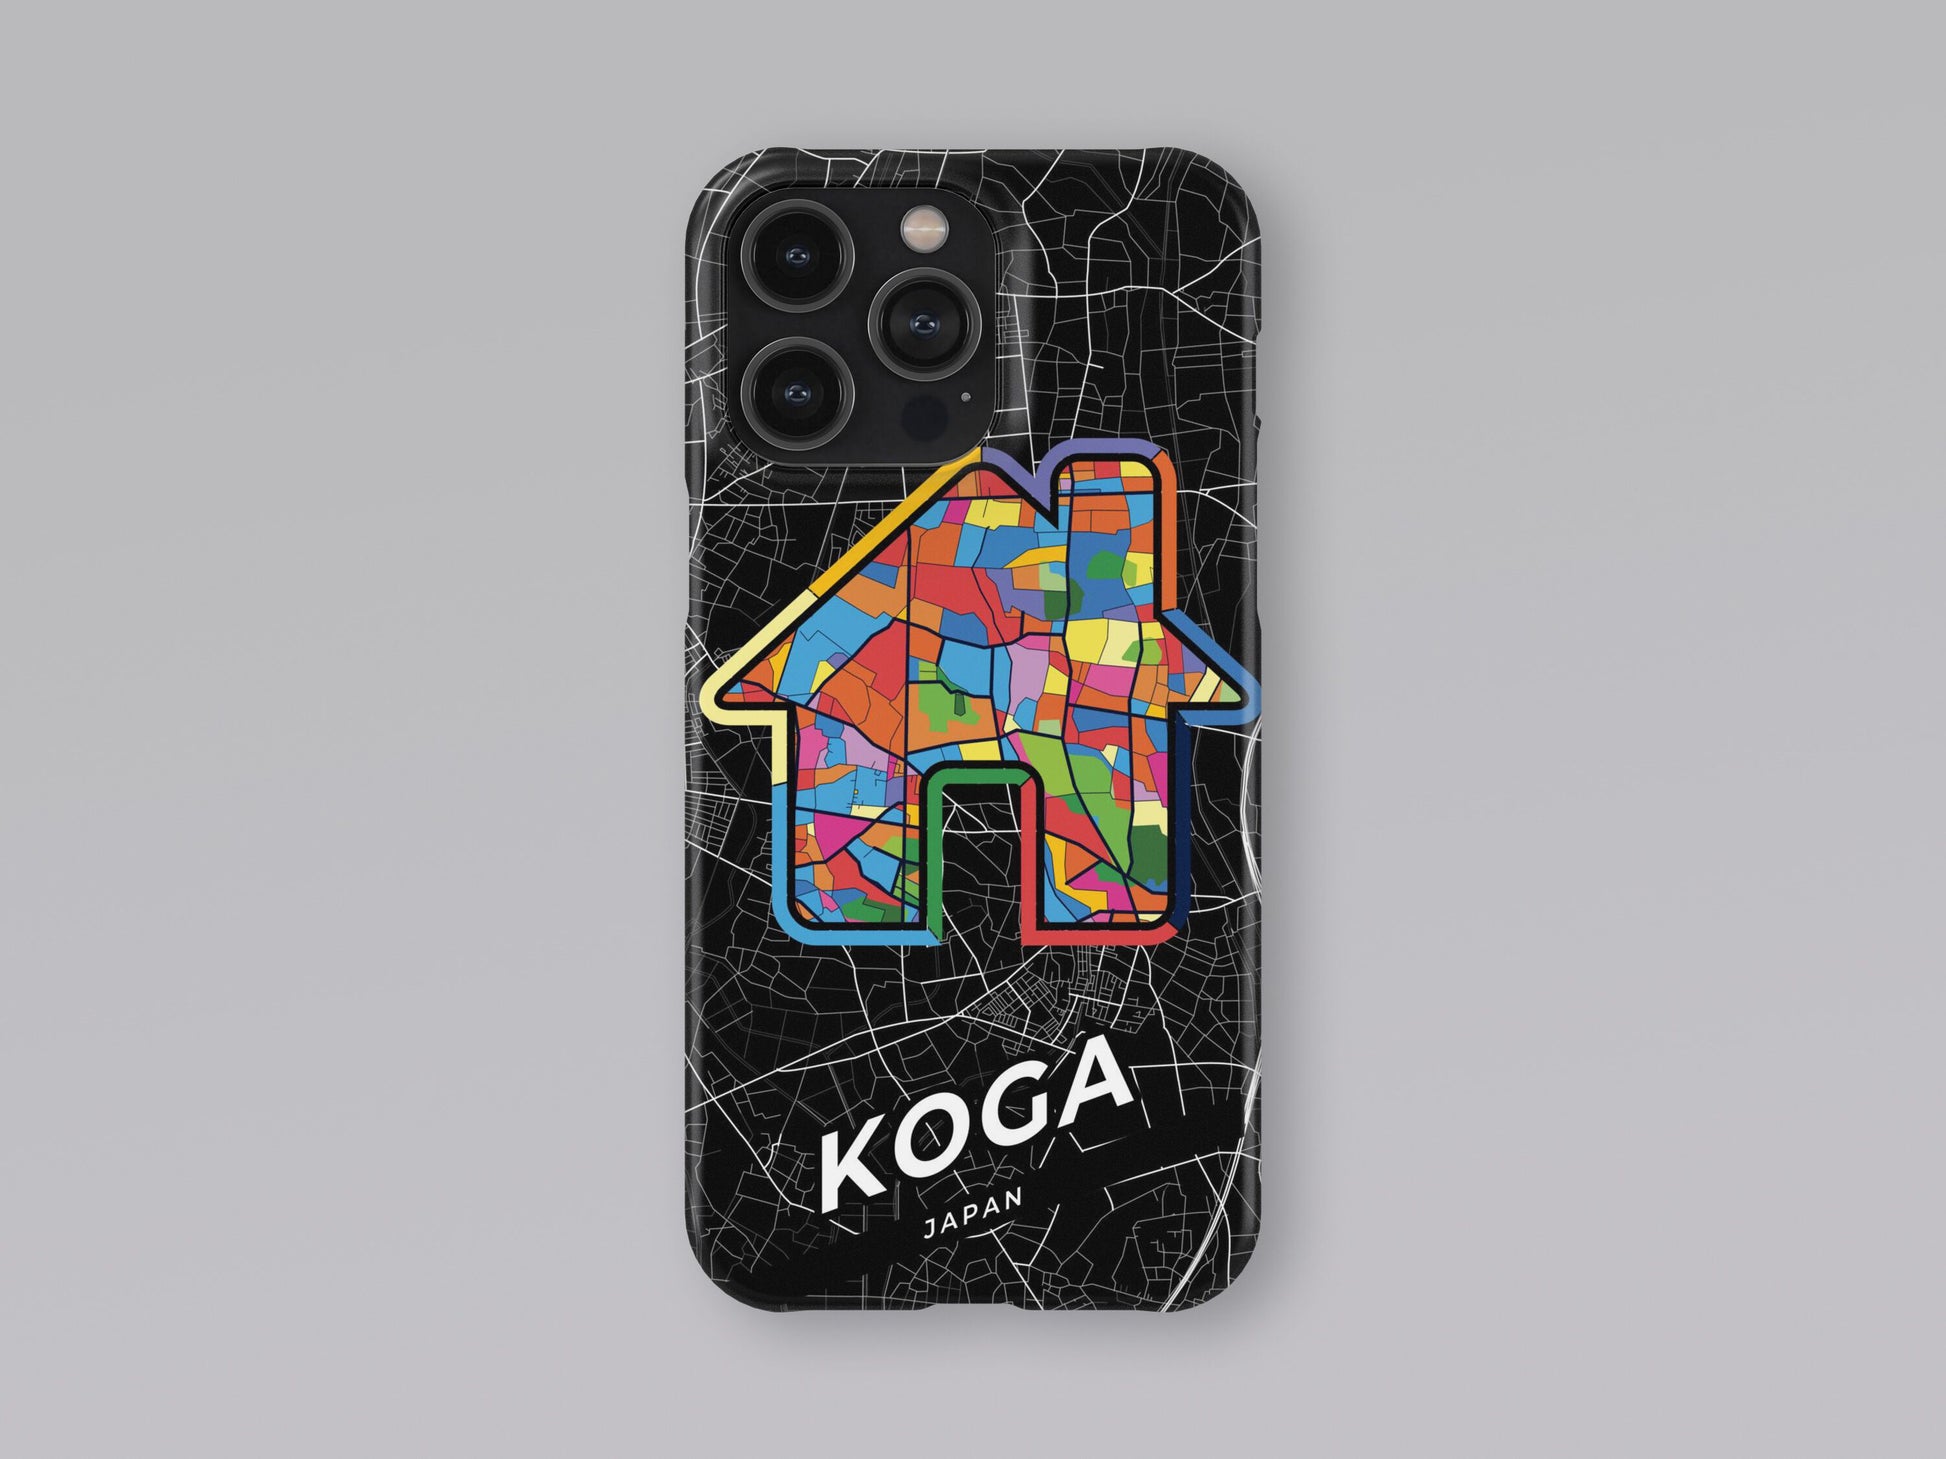 Koga Japan slim phone case with colorful icon. Birthday, wedding or housewarming gift. Couple match cases. 3